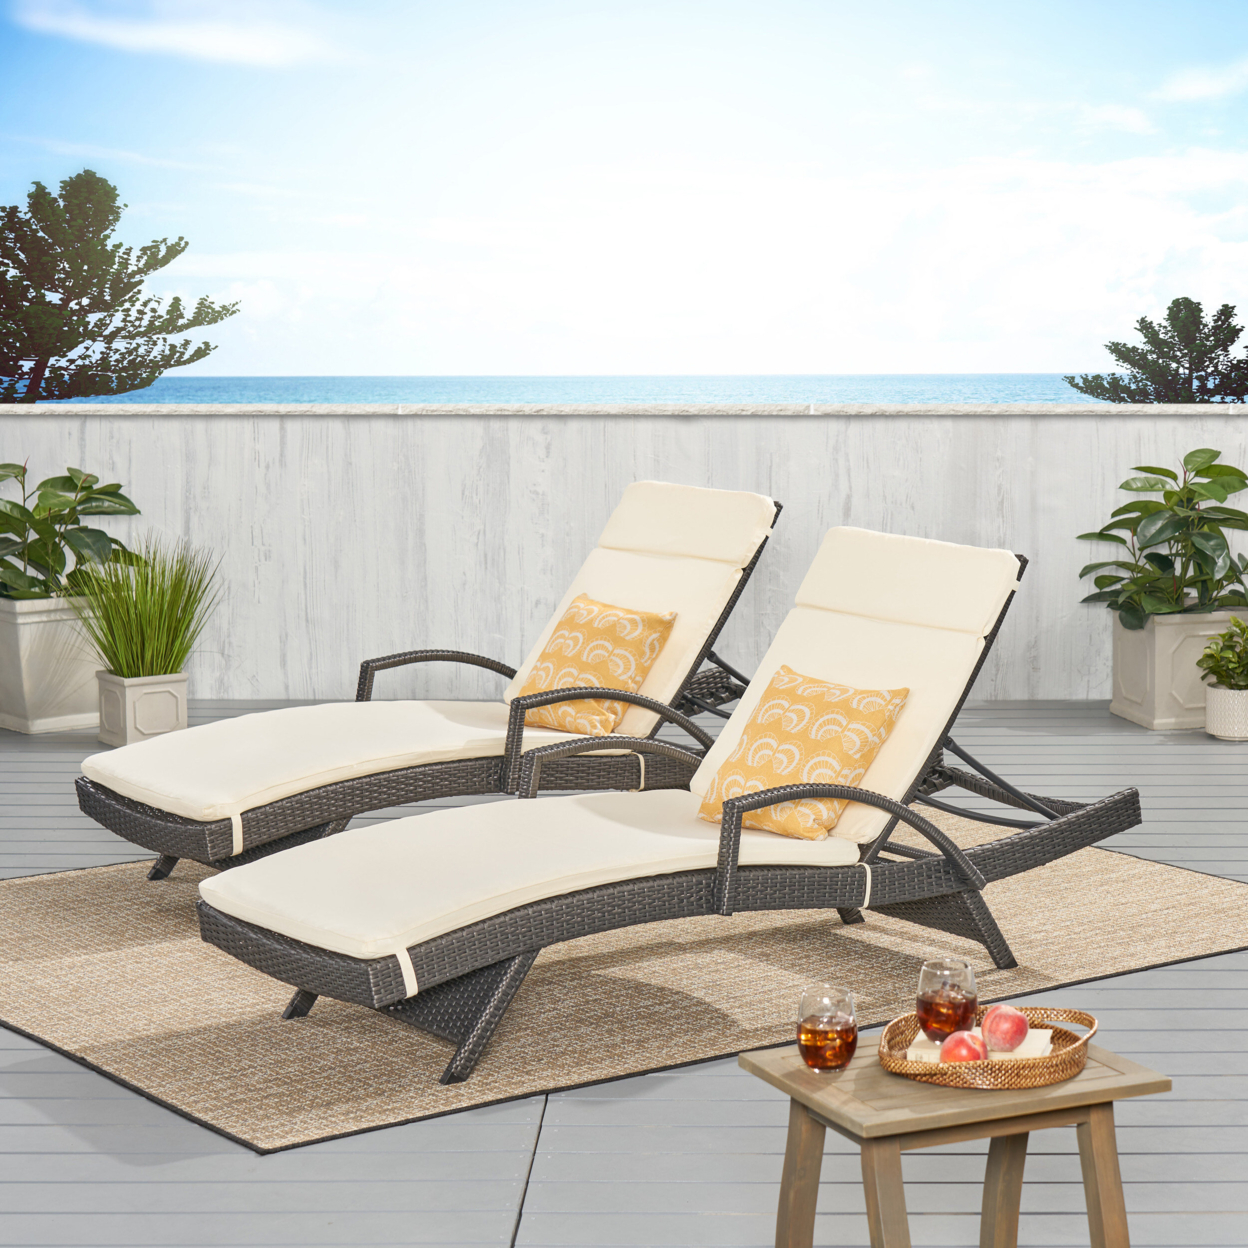 Soleil Outdoor Wicker Chaise Lounges With Water Resistant Cushions (Set Of 2) - Beige